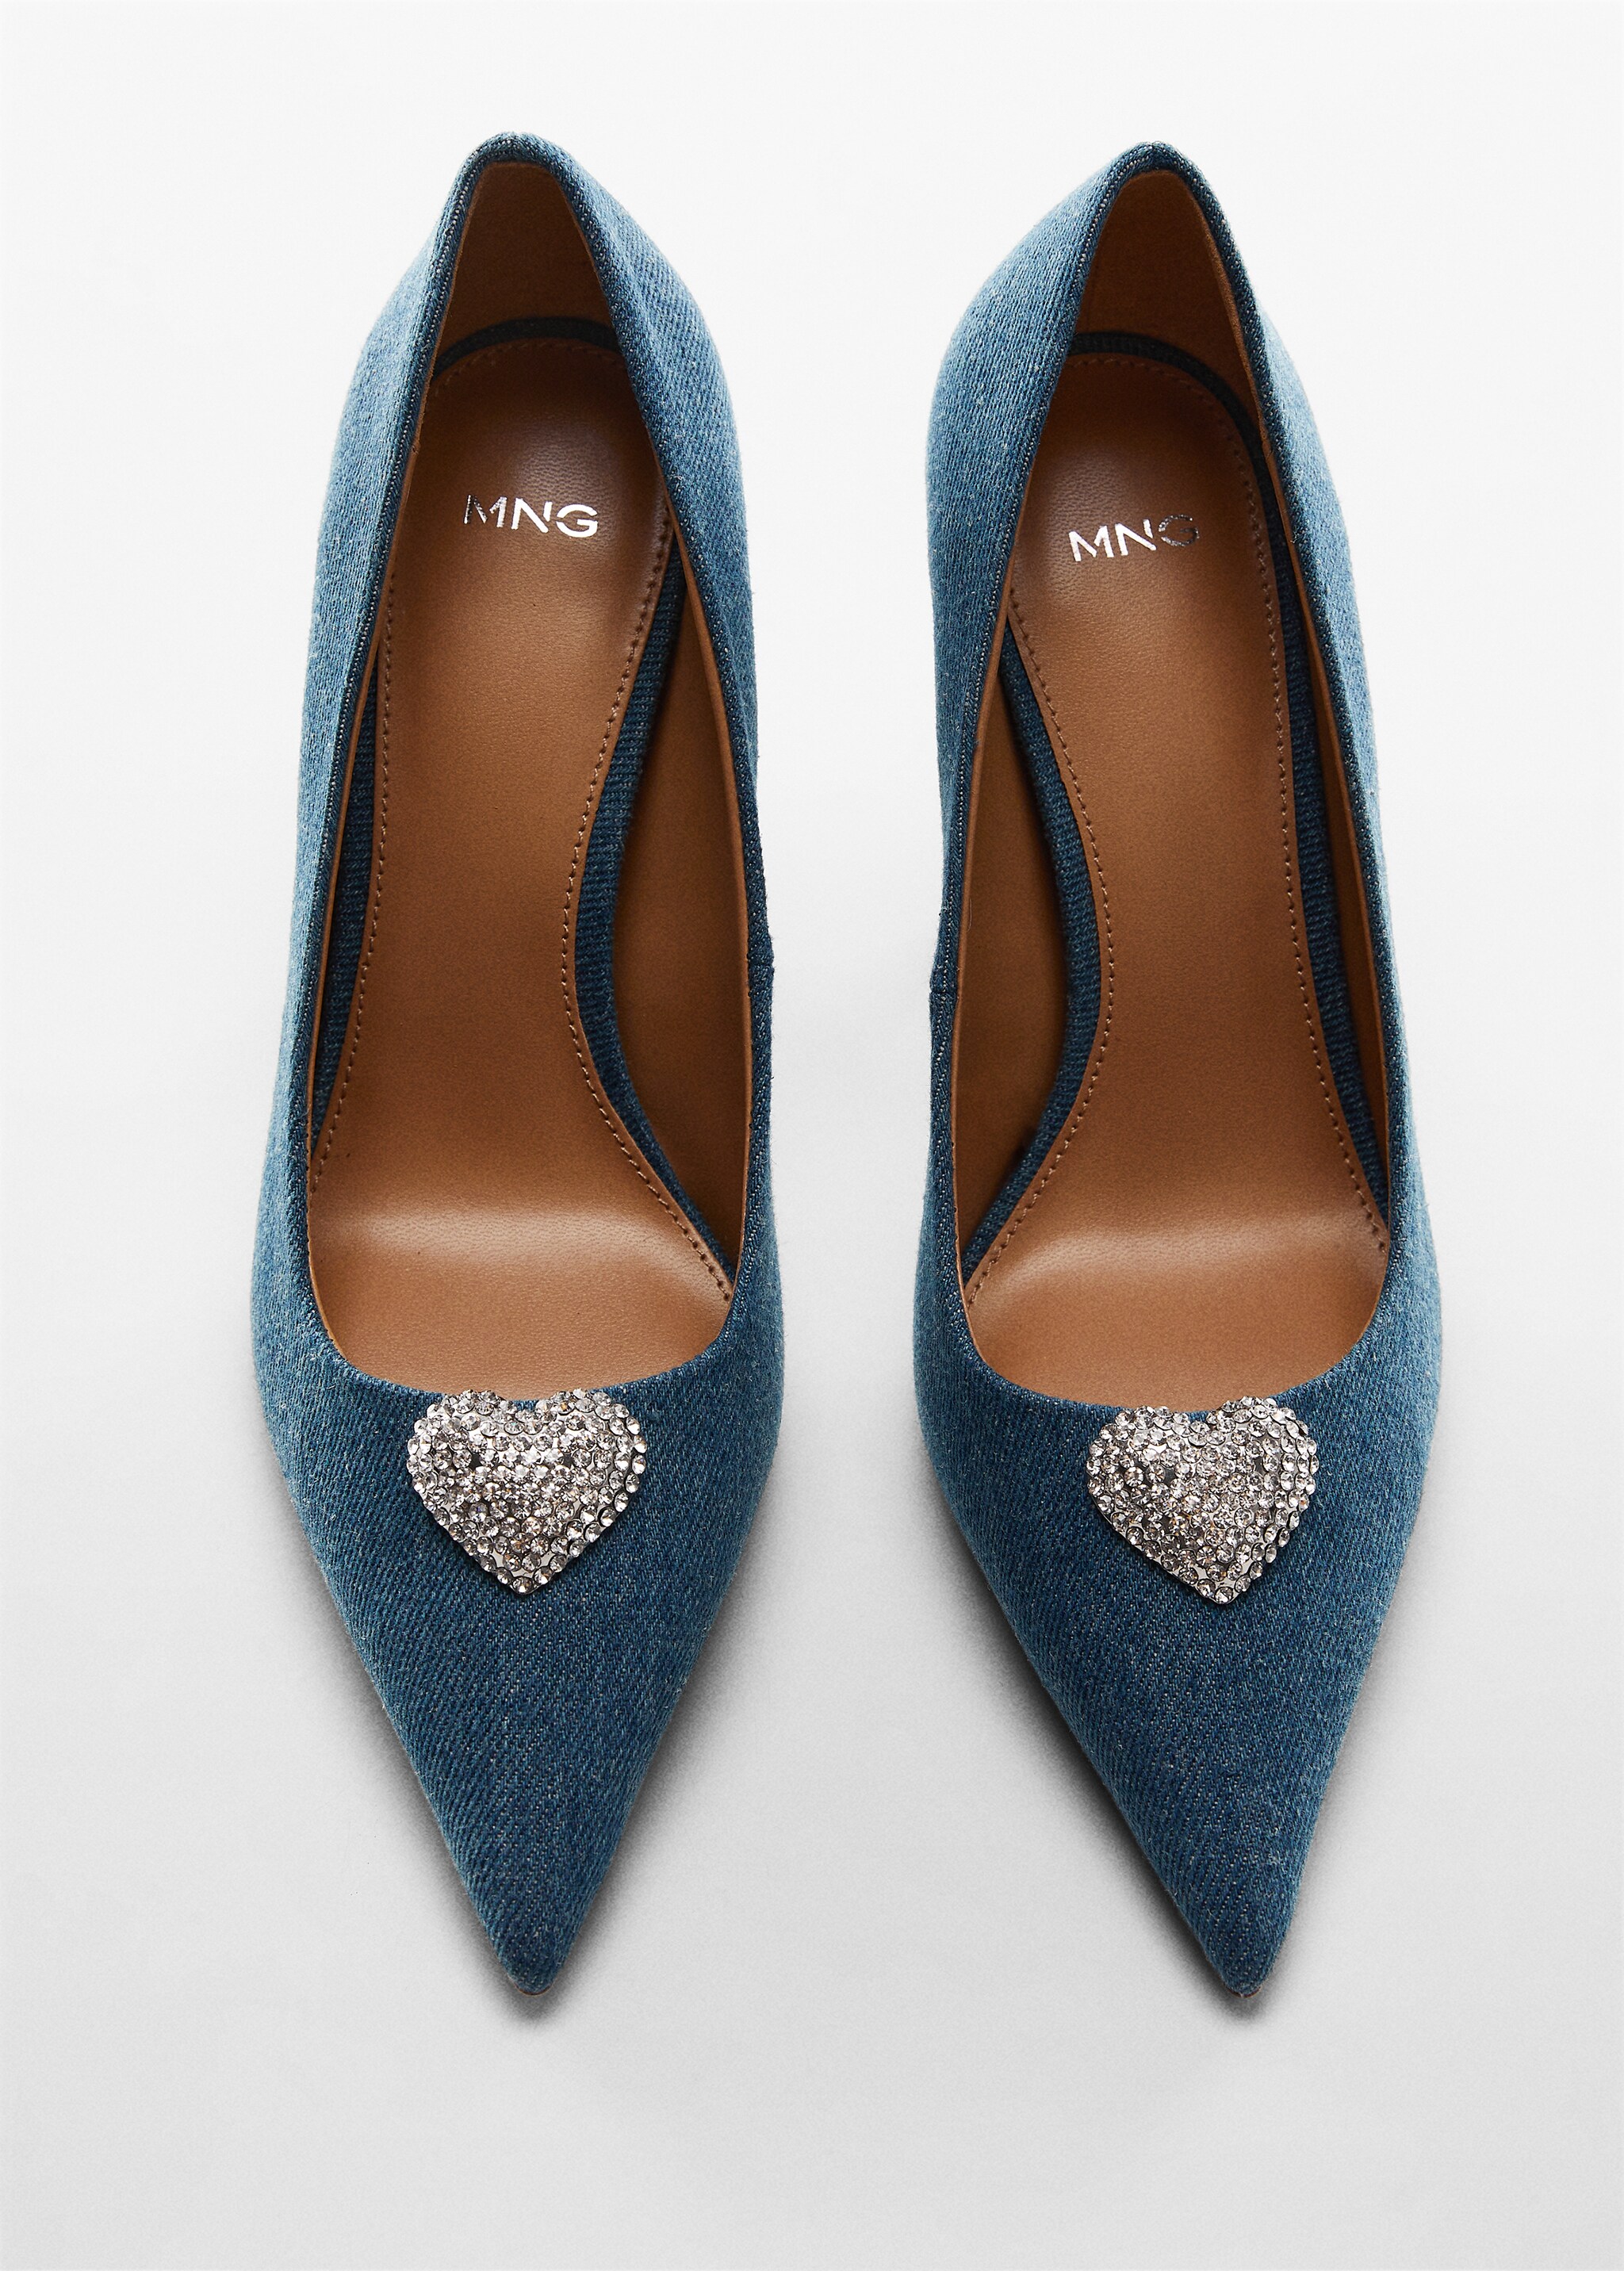 Denim shoes with rhinestone detail - Details of the article 5